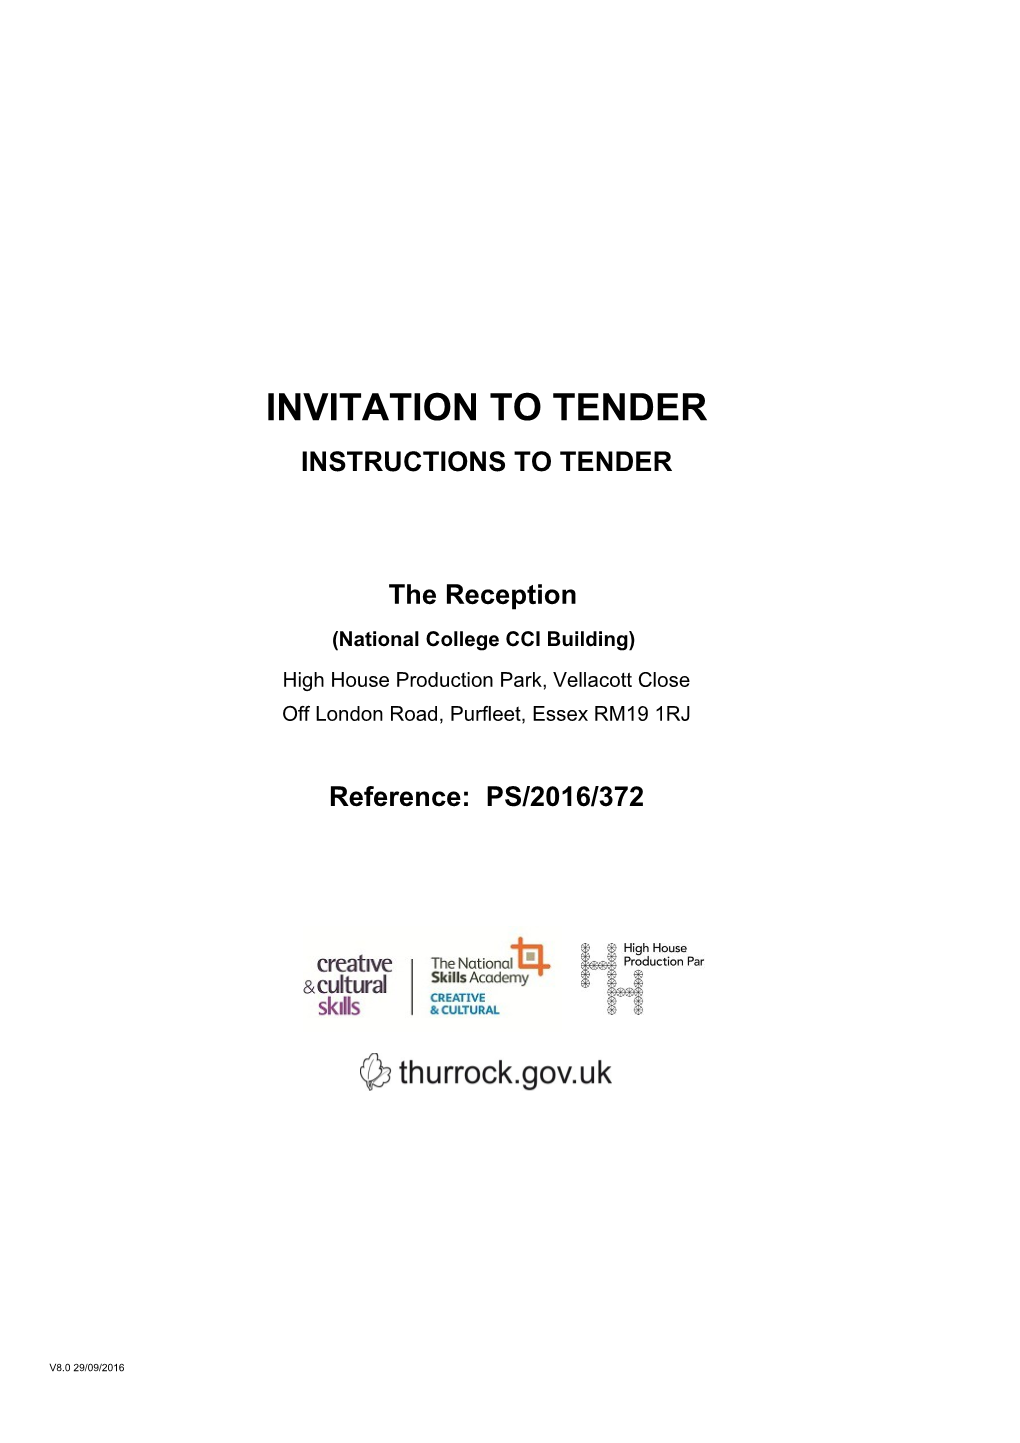 Thurrock Council - Invitation to Tender: High House Production Park Reception